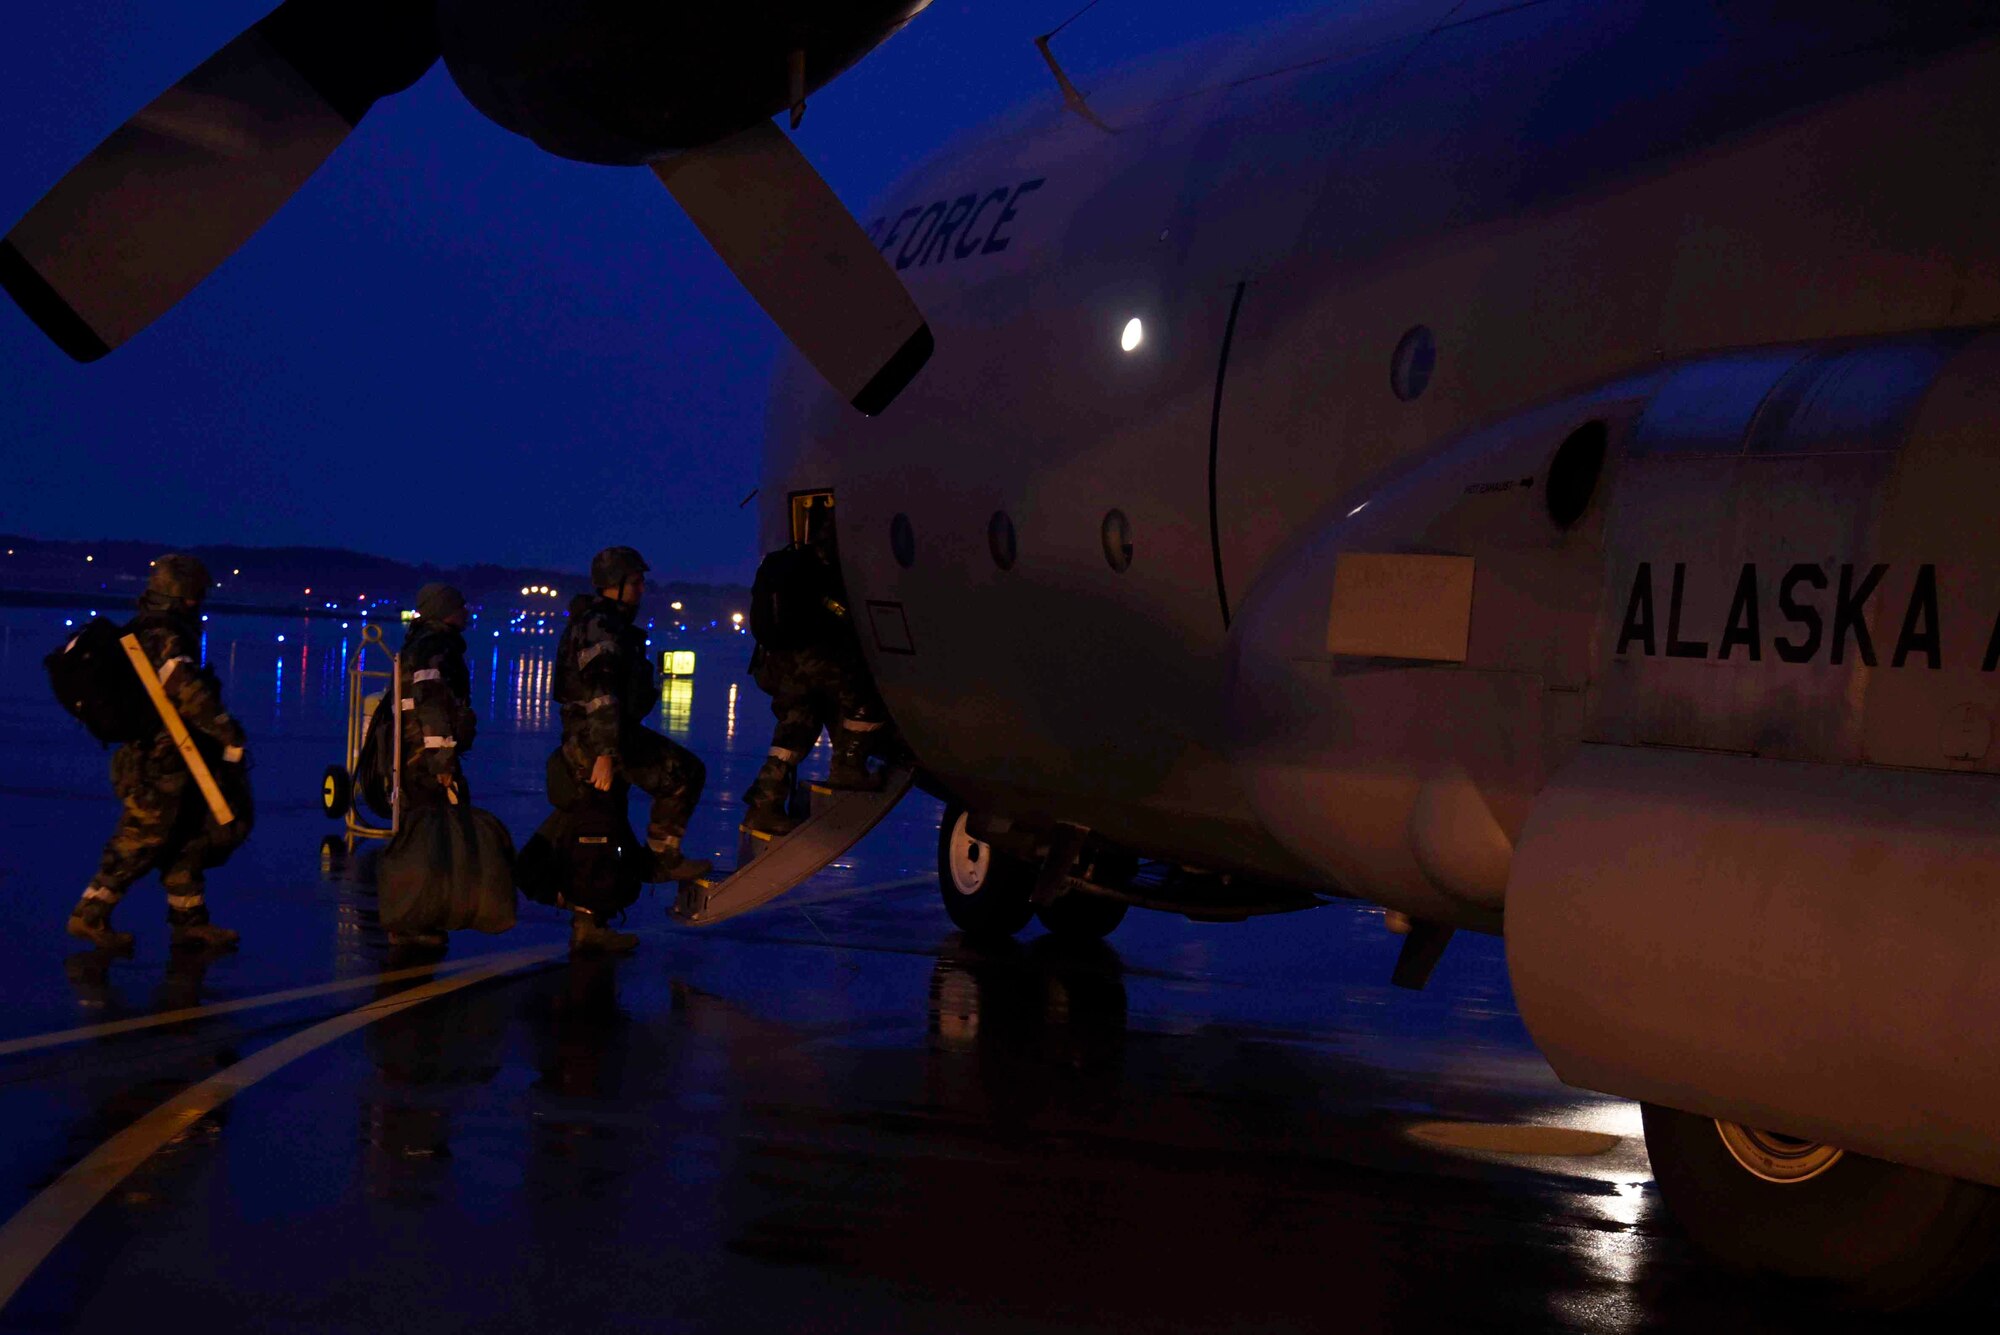 Airmen with the 35th Fighter Wing walk to an awaiting C-130 Hercules aircraft during exercise Beverly Sunrise 16-01 at Misawa Air Base, Japan, Nov. 1, 2015. The C-130 was heading to Osan Air Base, Korea in support of power projection within the Indo-Asian-Pacific region. The ?Beverly Sunrise? series of exercises are designed to test the readiness of Airmen within Pacific Air Forces? region of responsibility. (U.S. Air Force photo by Airman 1st Class Jordyn Fetter/Released)